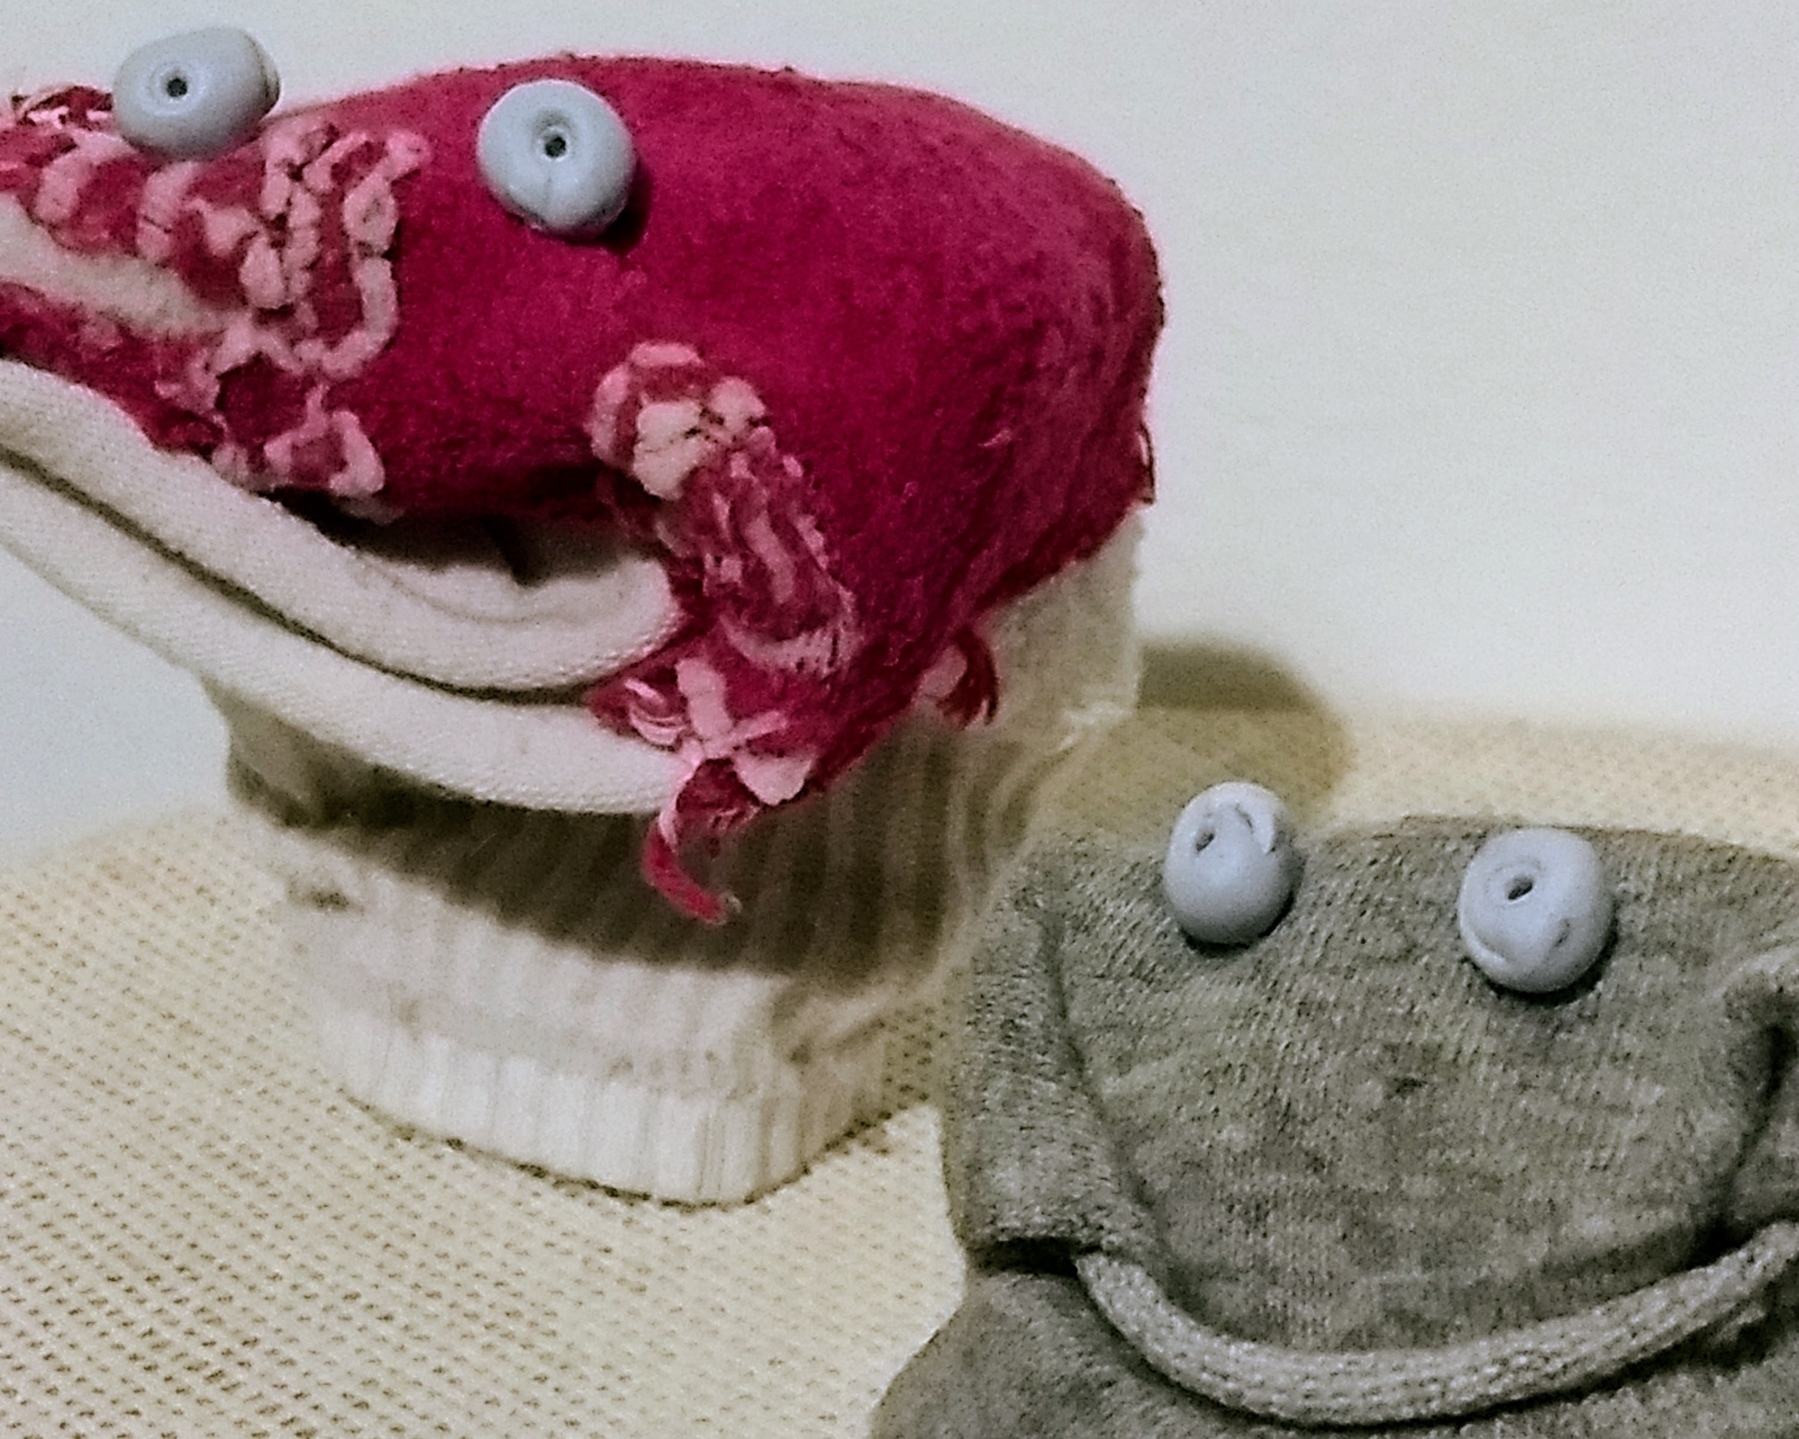 With blu-tac eyes, two socks that don’t match easily transform into sock puppets 